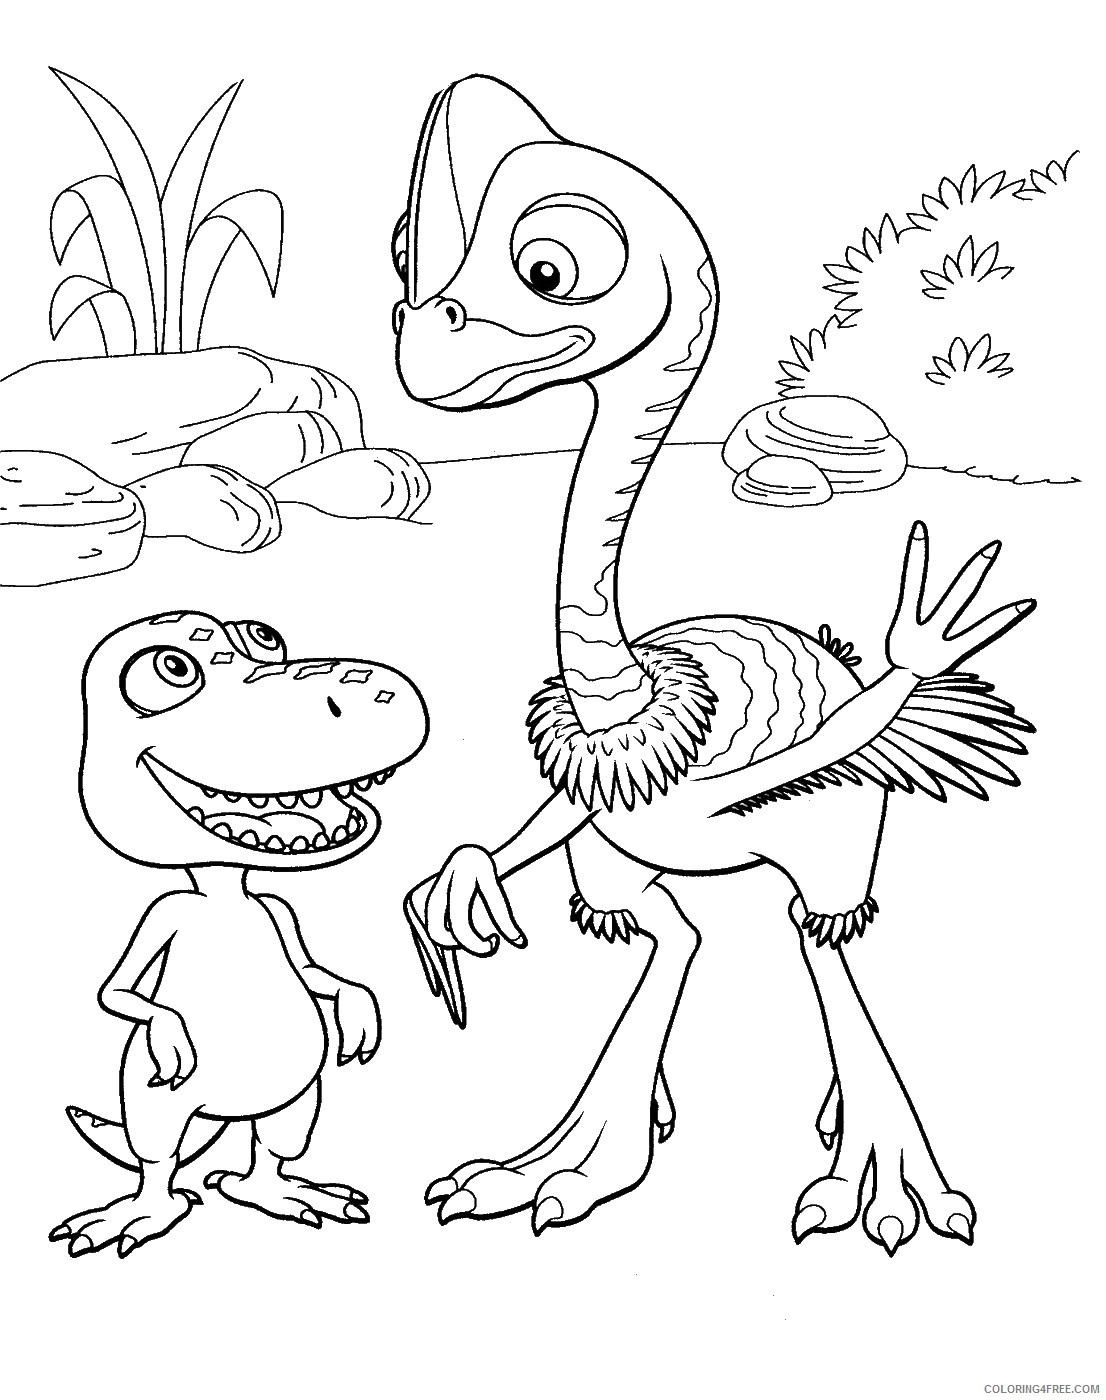 Dinosaur Train Coloring Pages Cartoons dino_train_cl_23 Printable 2020 2244 Coloring4free